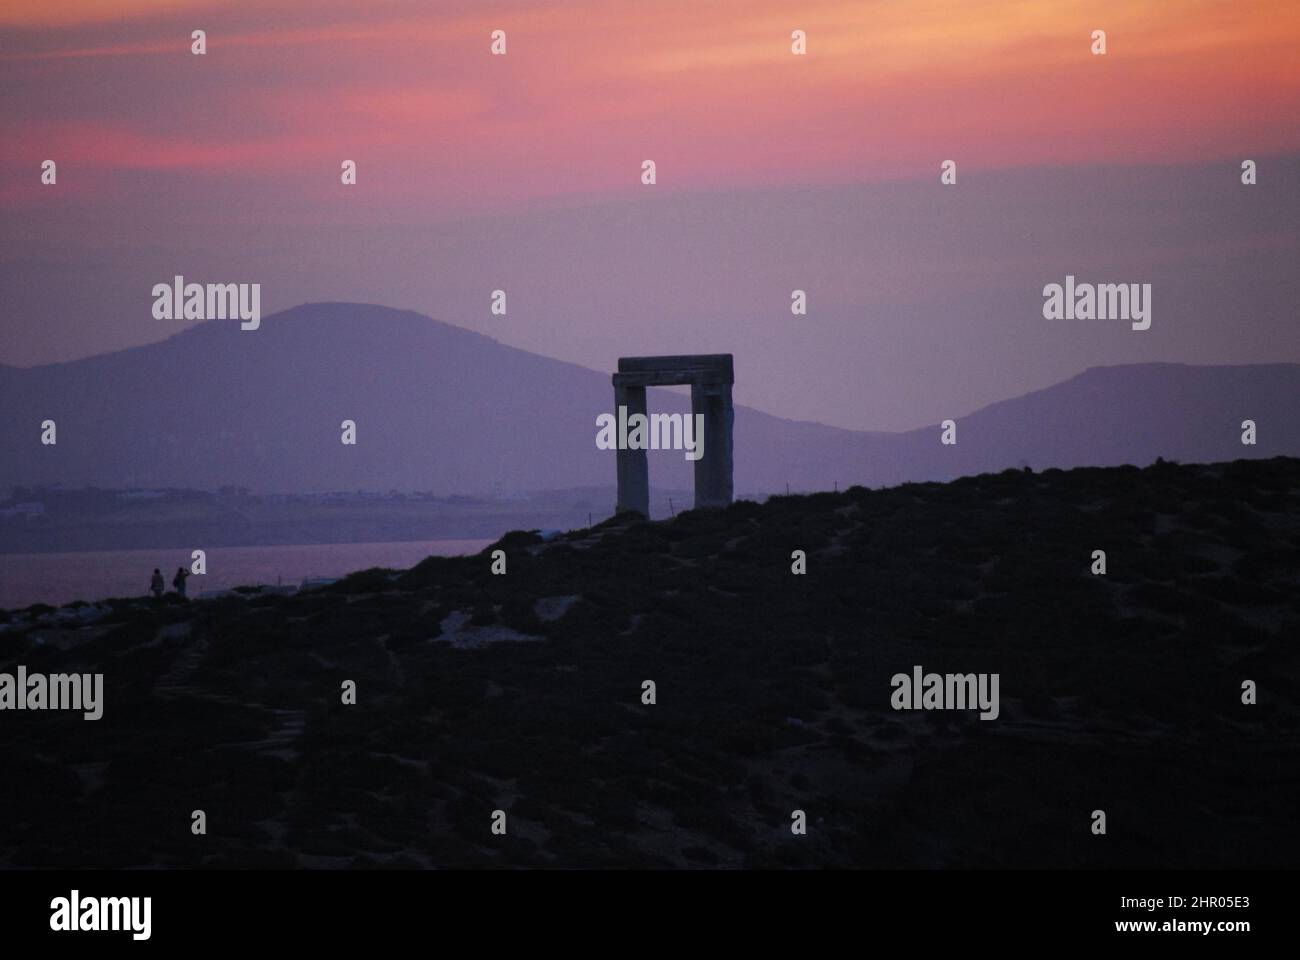 Panorama of dramatically colorful sunset over the ruins of the ancient Temple of Apollo, Naxos, Greece. Note the distant people are not recognizable. Stock Photo